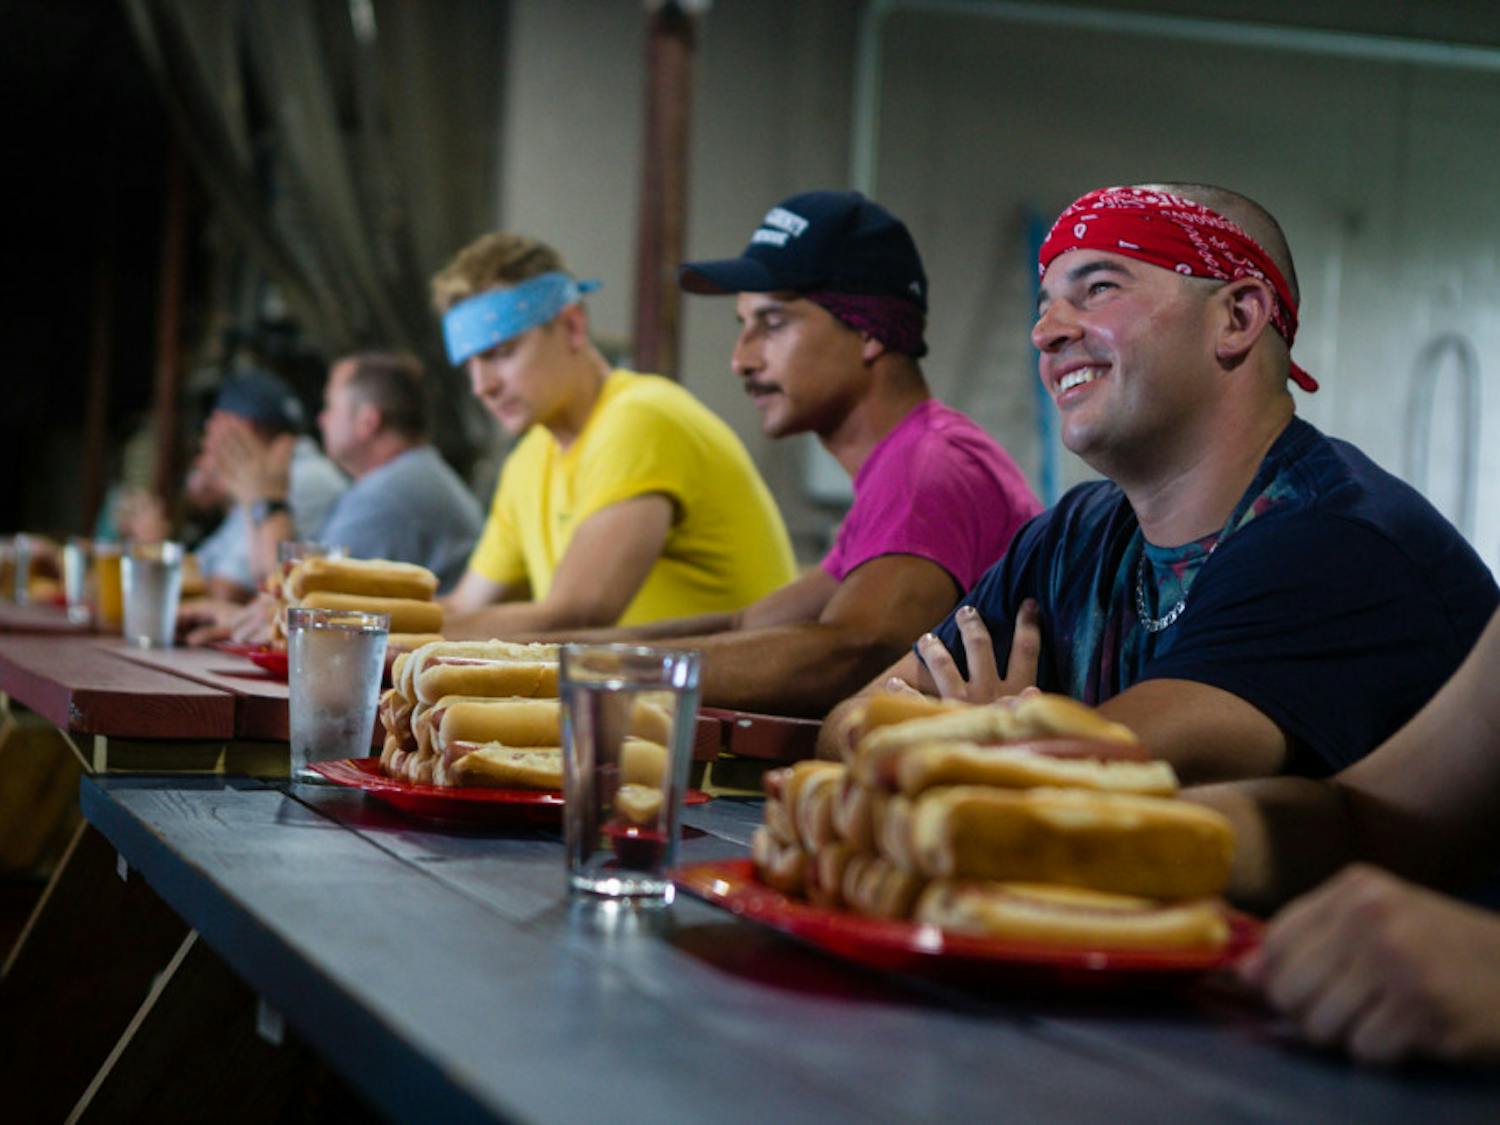 Members of Marion County Fire Rescue wait to begin the first annual “Sausages for Safety” hot dog eating competition on Saturday afternoon. The competition, held at First Magnitude Brewing Company, was a fundraiser for Safety City.